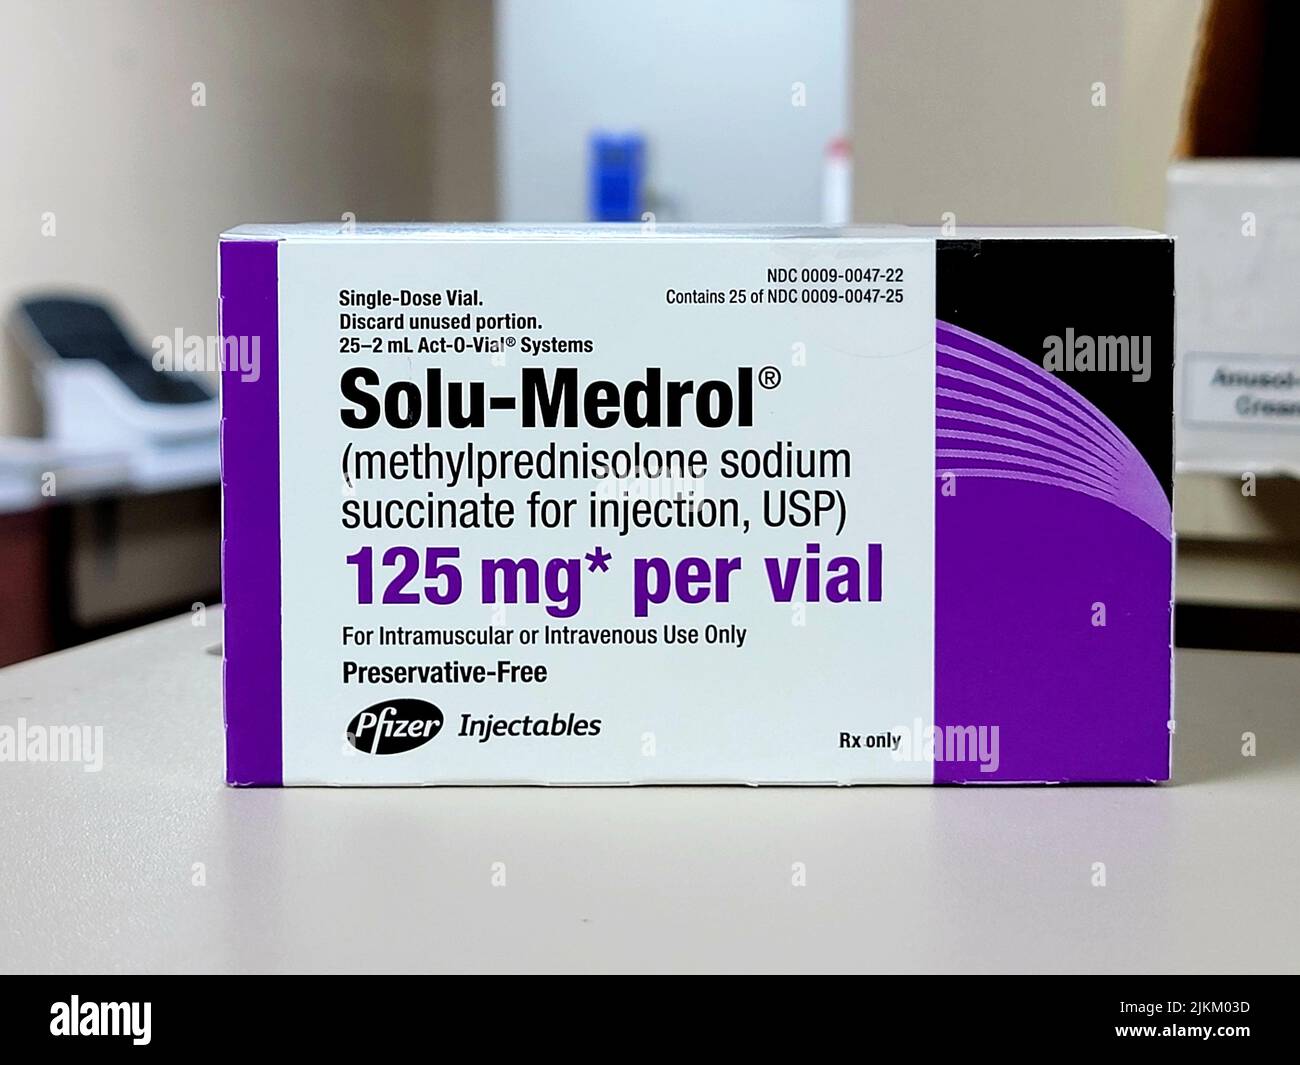 Solu Medrol 125mg, methylprednisone Sodium Succinate. It can treat inflammation, severe allergies, flares of chronic illnesses, and many others. Stock Photo